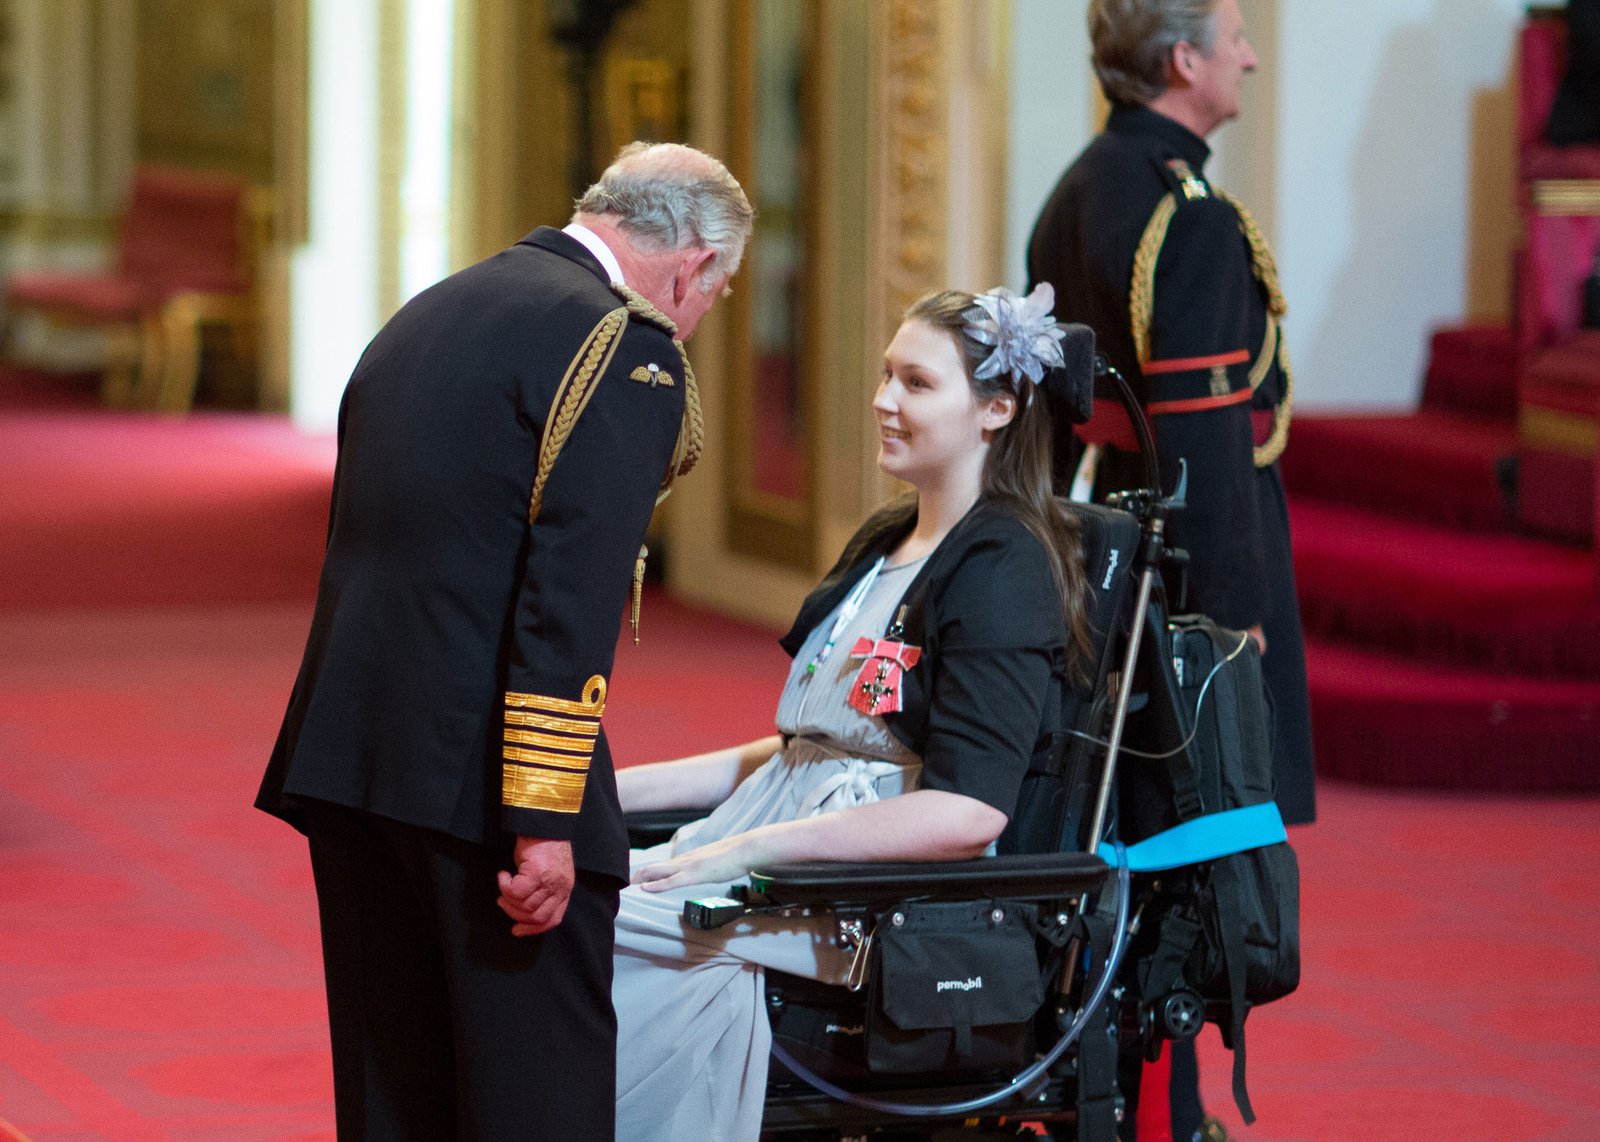 Lucy Watts MBE